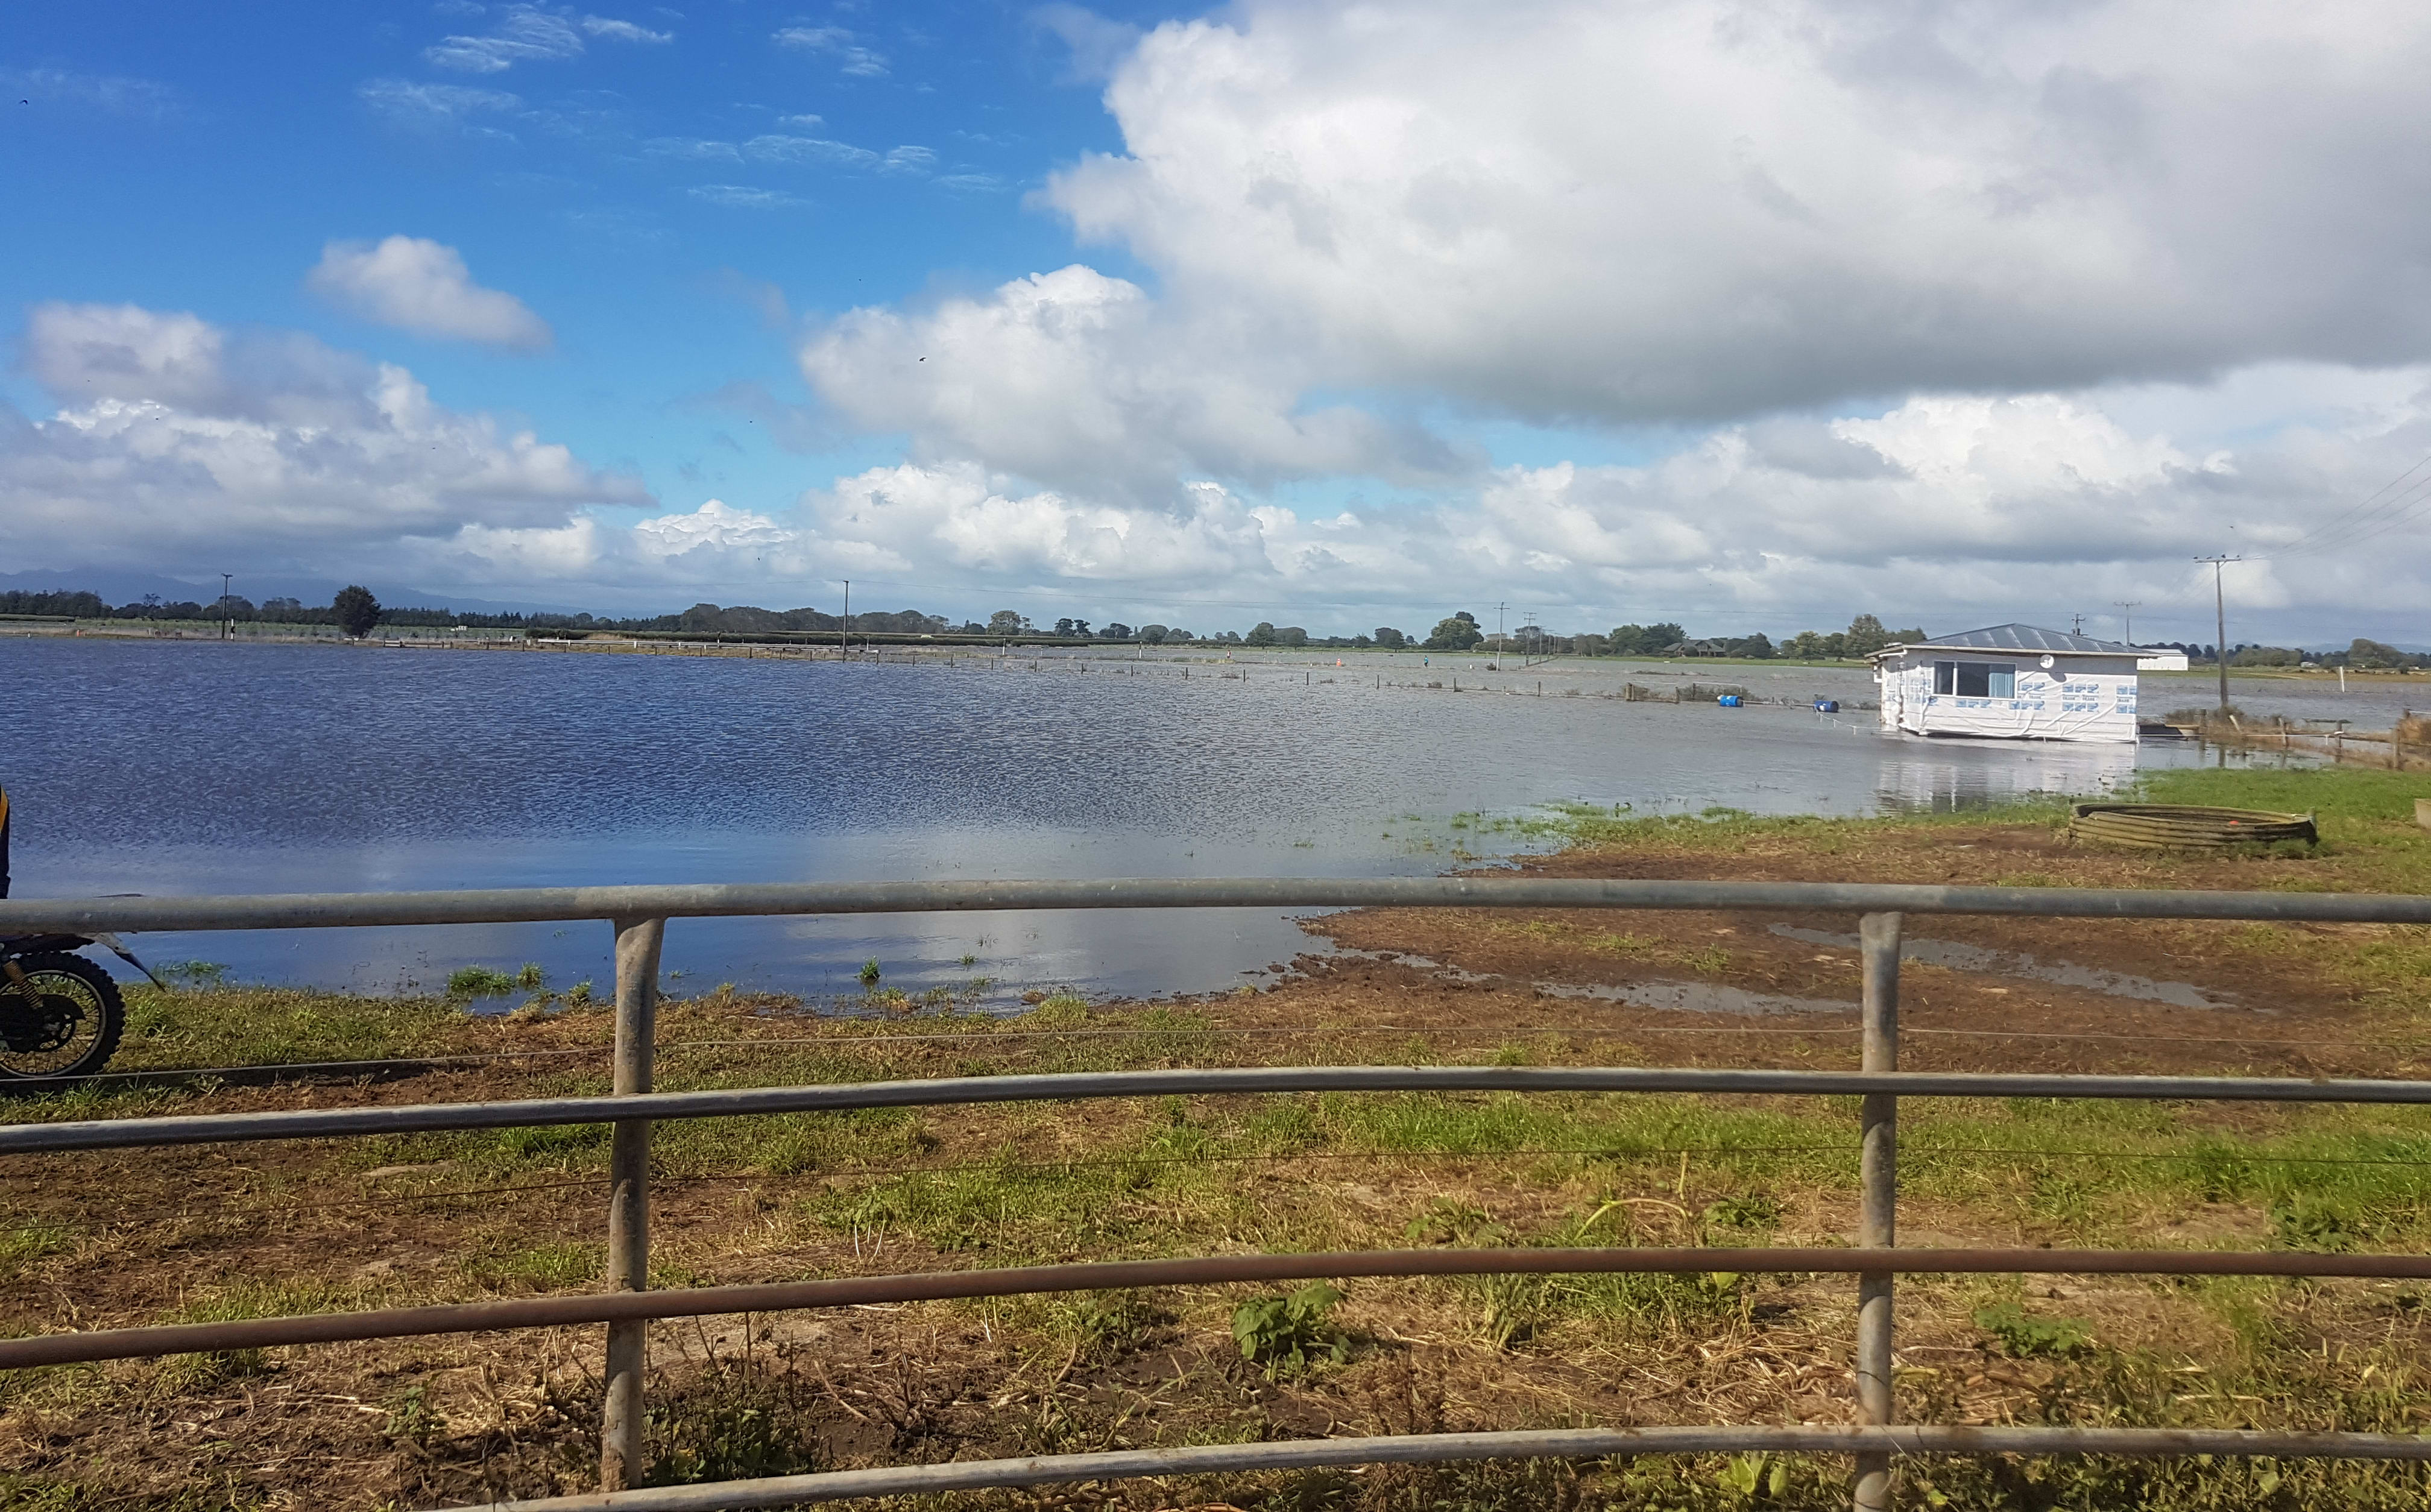 Waitoa river is in flood following Cyclone Cook.